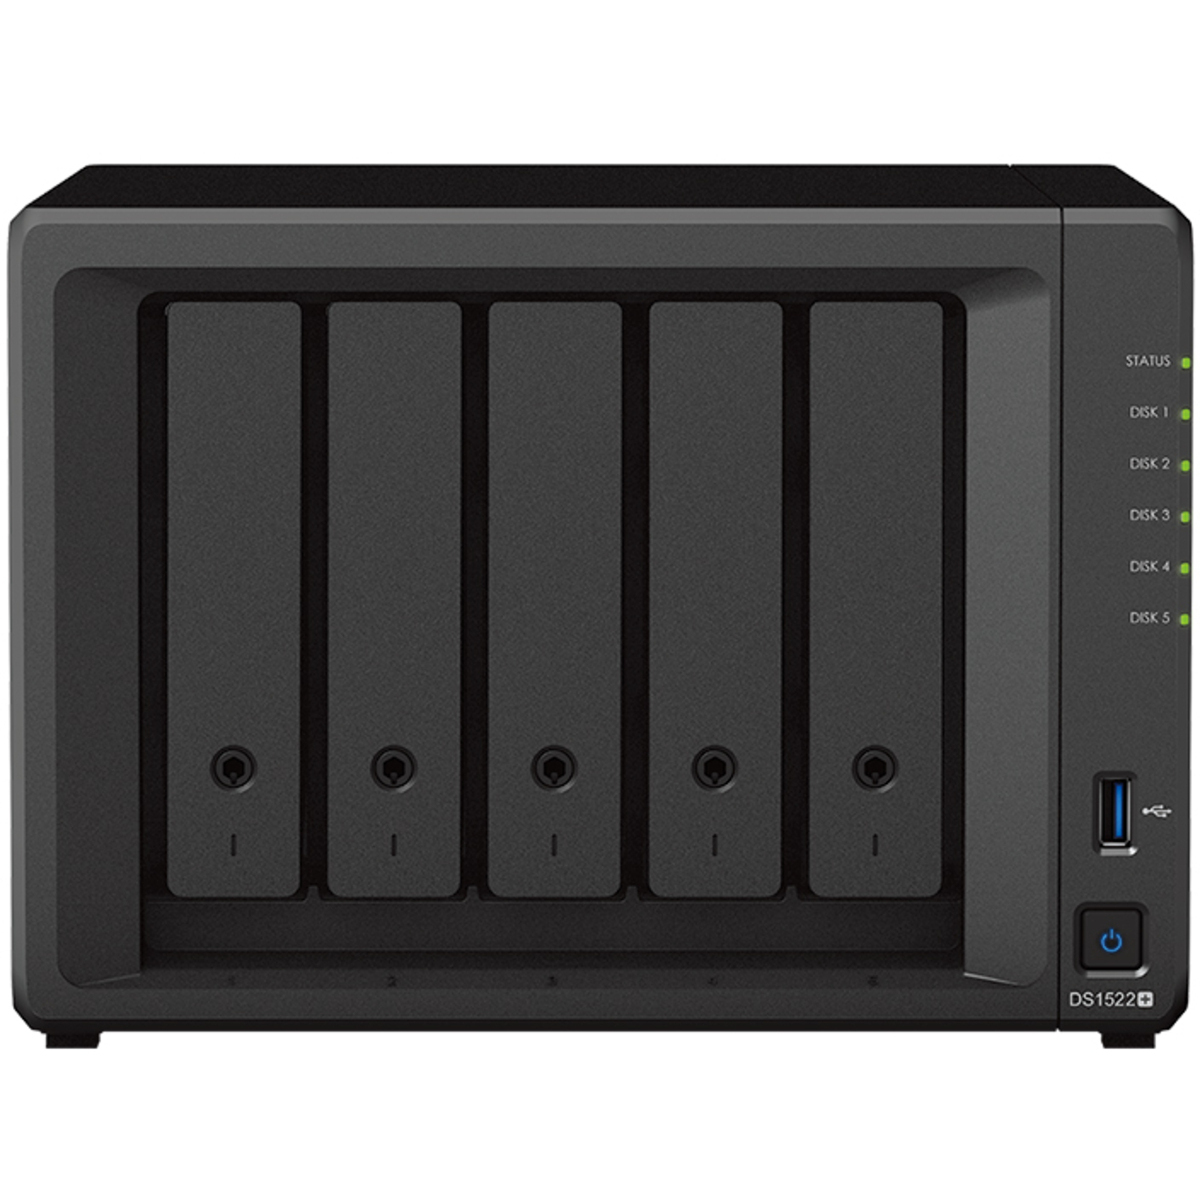 Synology DiskStation DS1522+ 10tb 5-Bay Desktop Multimedia / Power User / Business NAS - Network Attached Storage Device 5x2tb Samsung 870 EVO MZ-77E2T0BAM 2.5 560/530MB/s SATA 6Gb/s SSD CONSUMER Class Drives Installed - Burn-In Tested - ON SALE DiskStation DS1522+